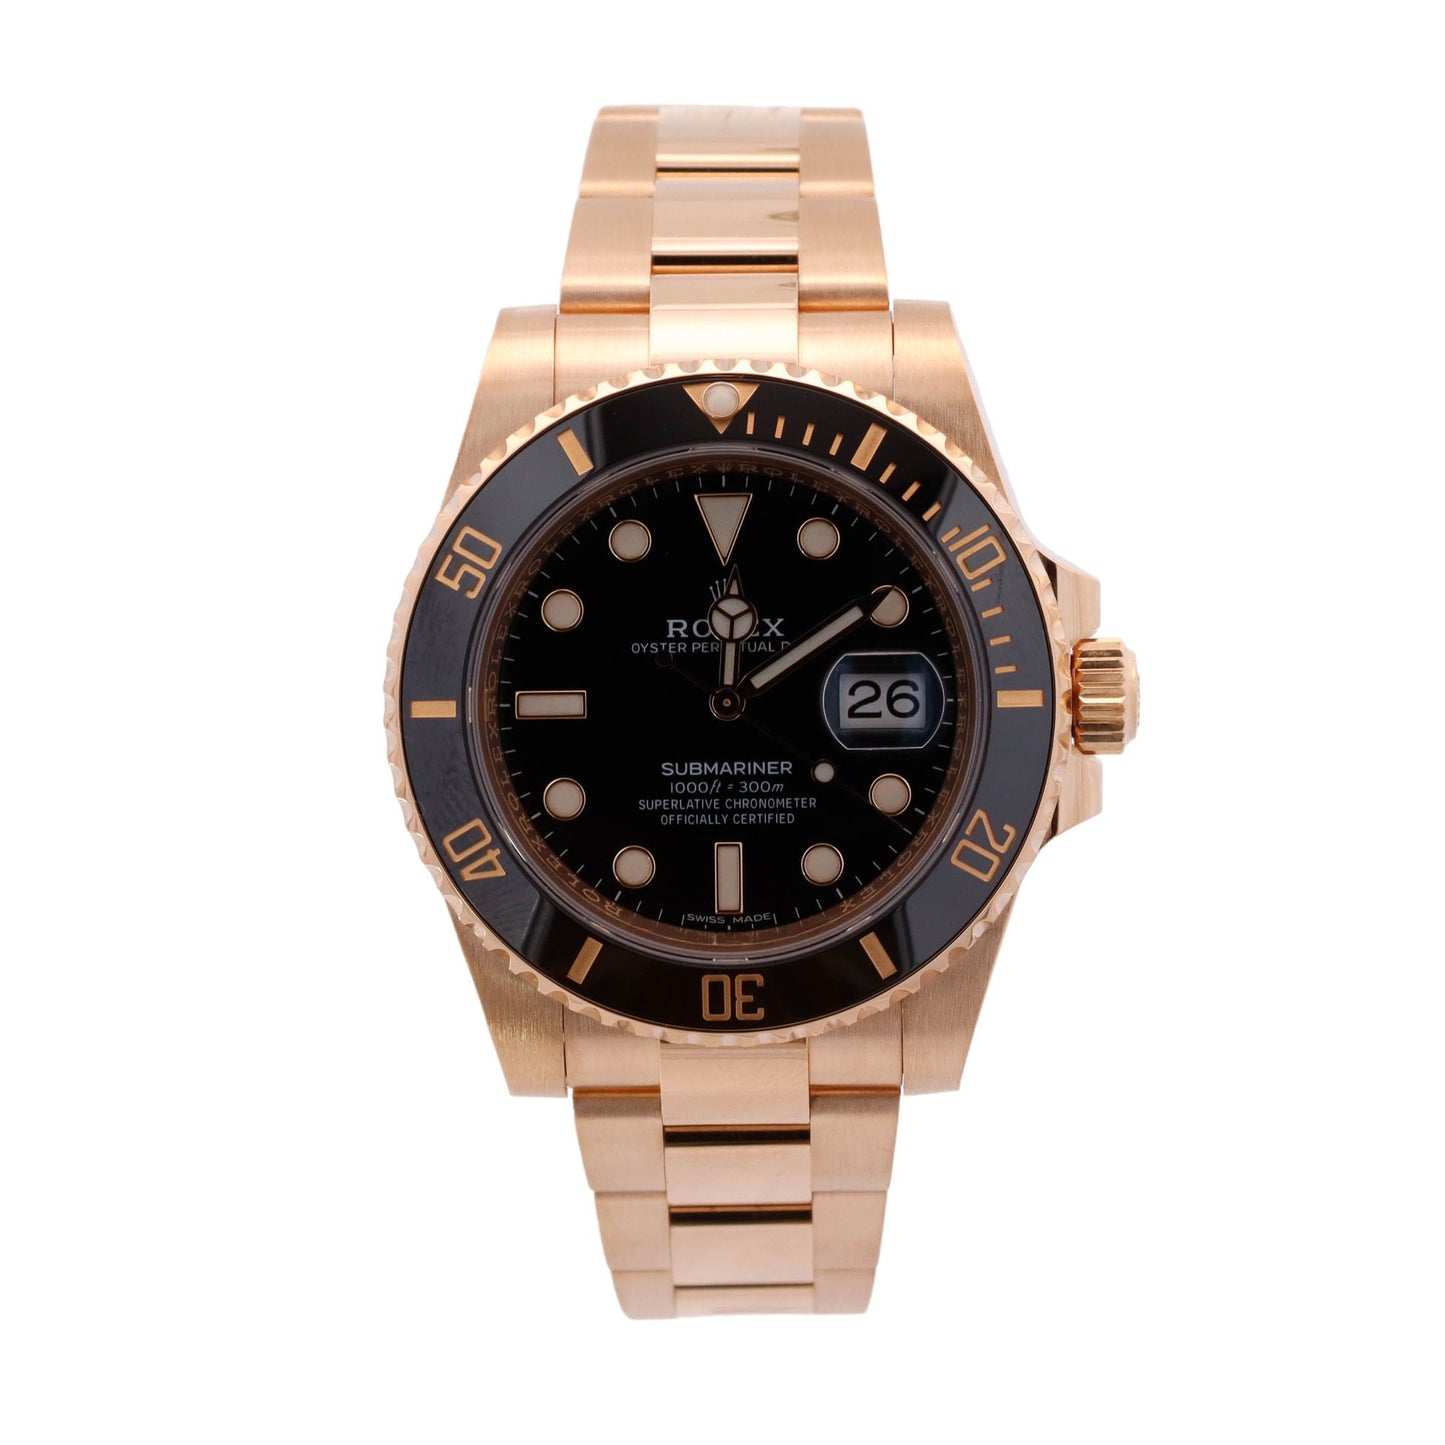 Rolex Submariner Yellow Gold 41mm Black Dot Dial Watch Reference# 116618LN - Happy Jewelers Fine Jewelry Lifetime Warranty